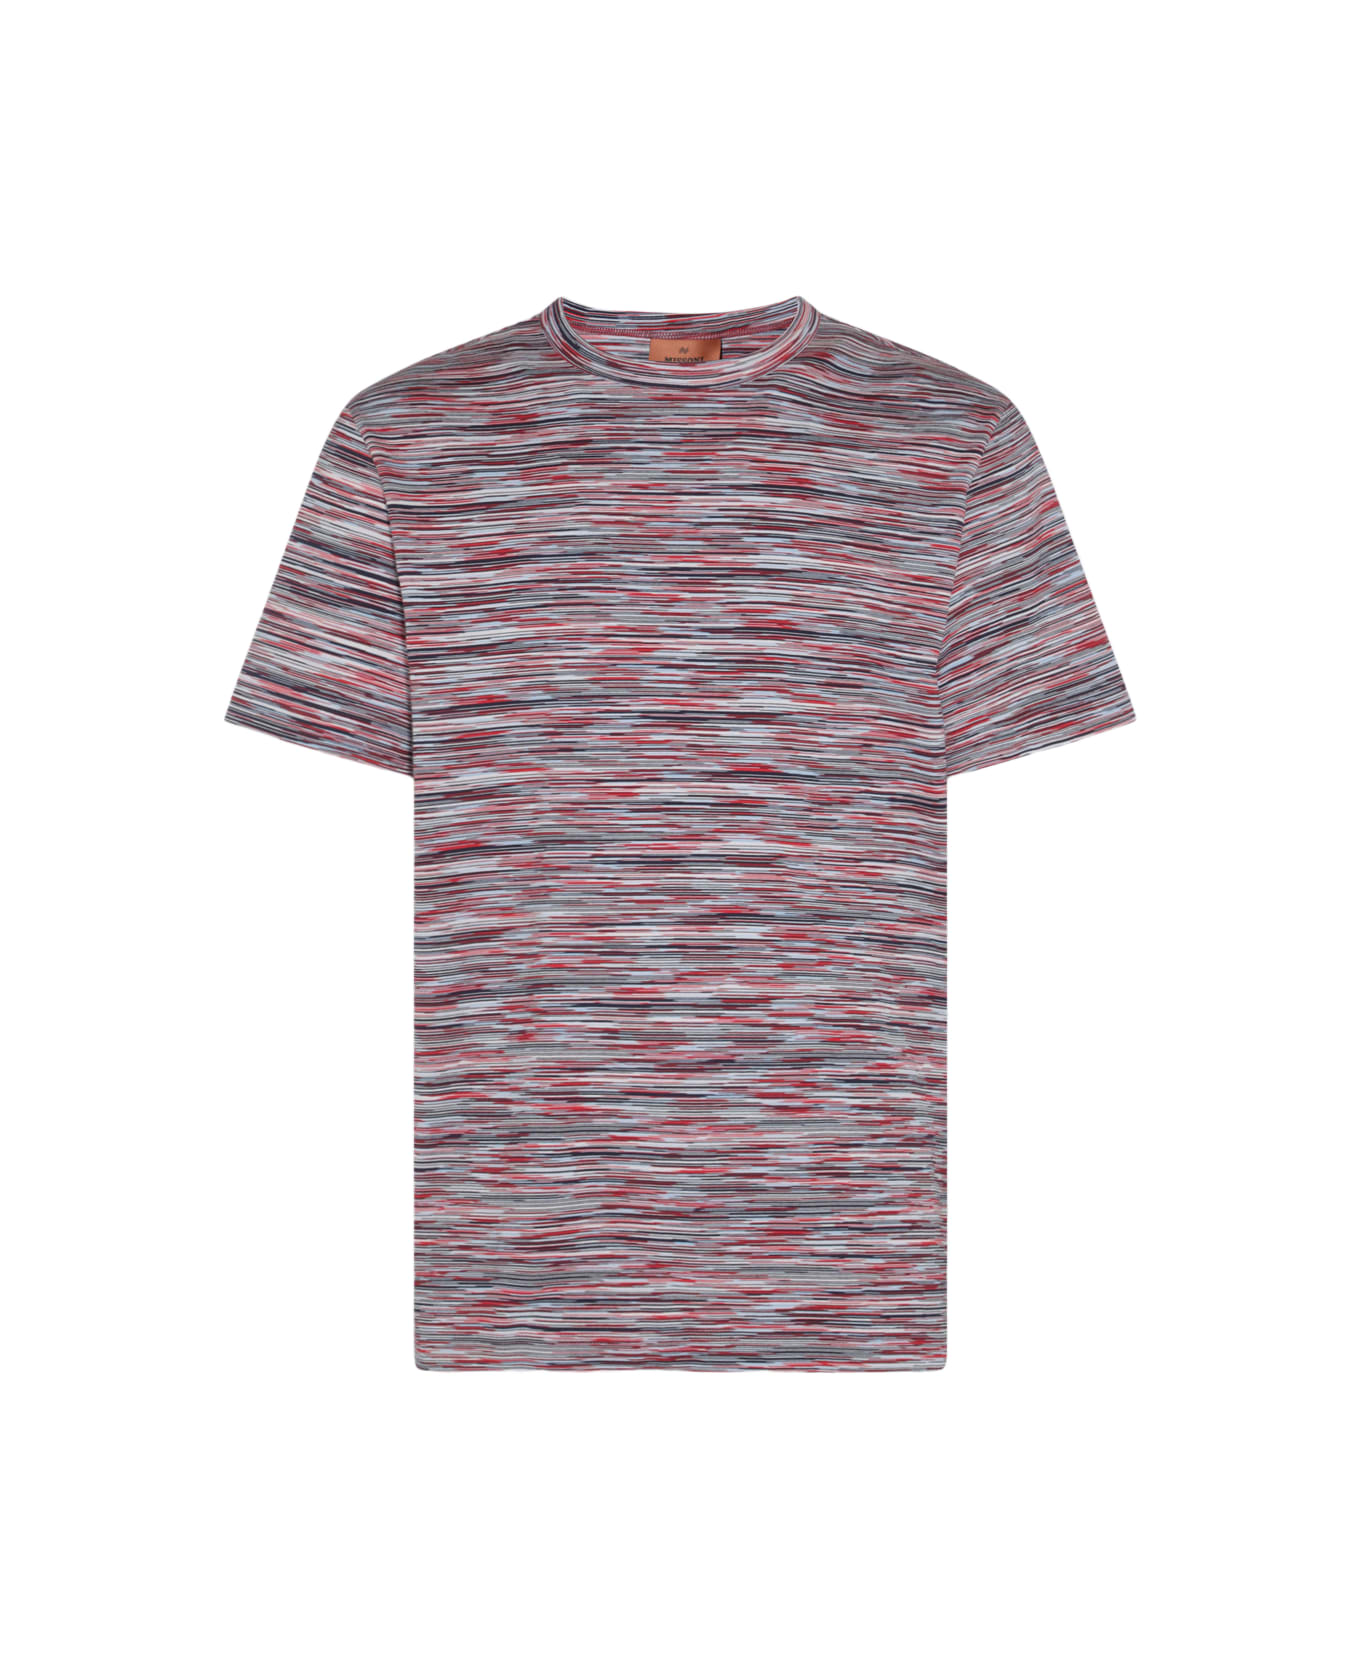 Missoni Multicolor Cotton T-shirt - RED AND BLUE SPACE DYED